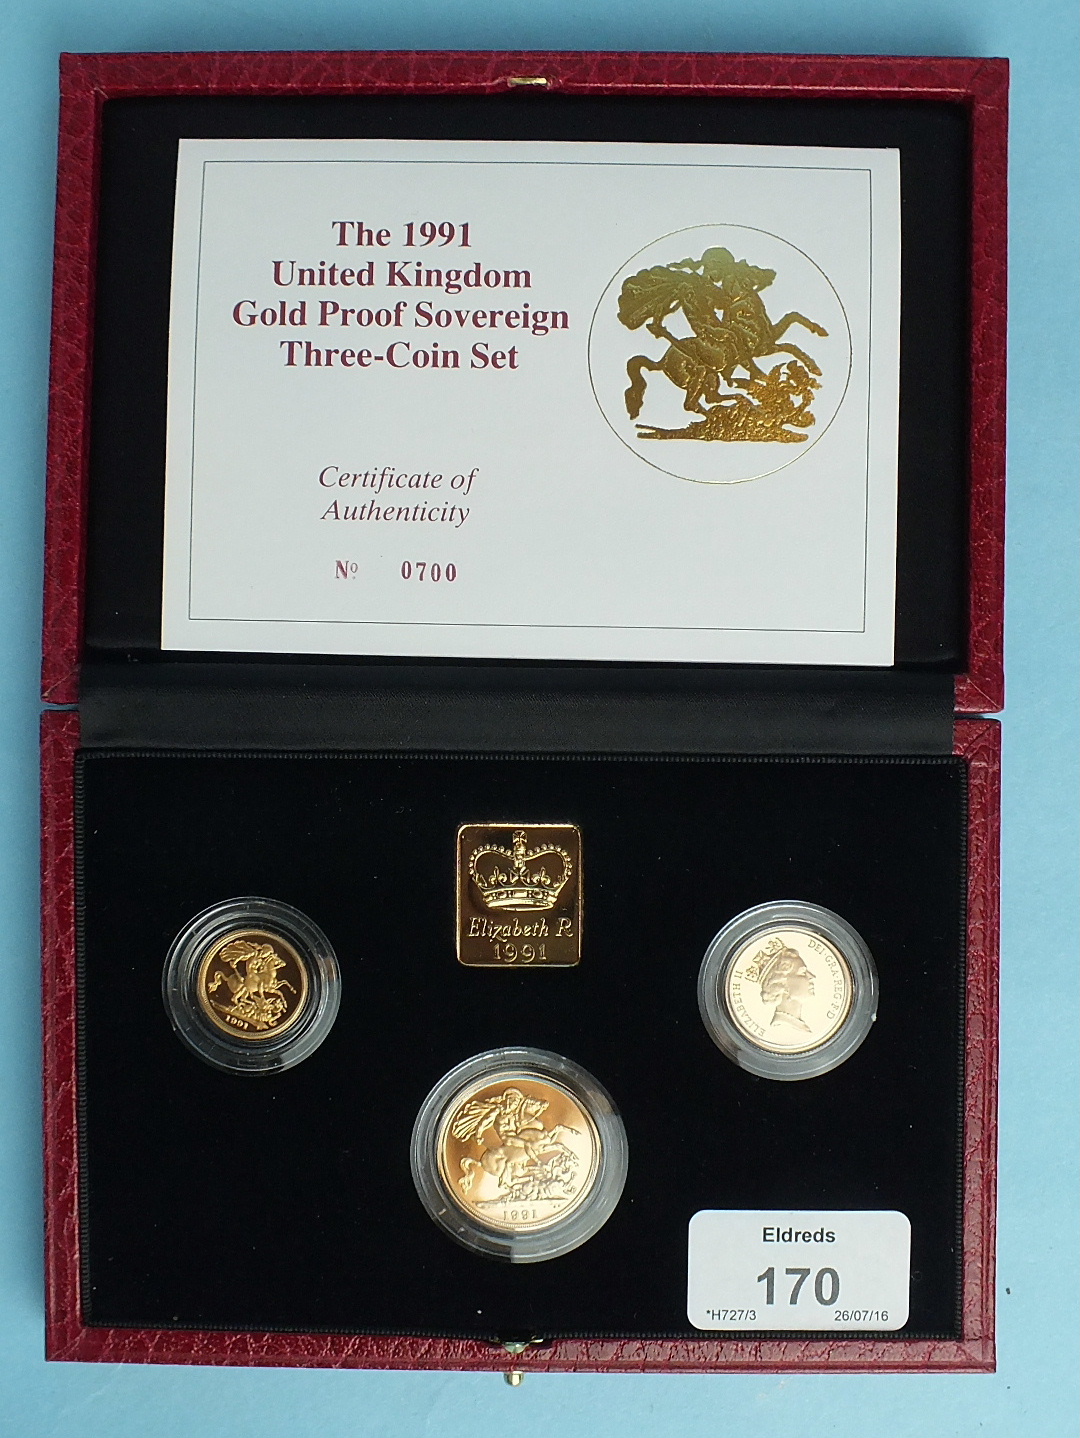 The Royal Mint 1991 United Kingdom Gold Proof Sovereign Three-Coin Set, comprising: double-